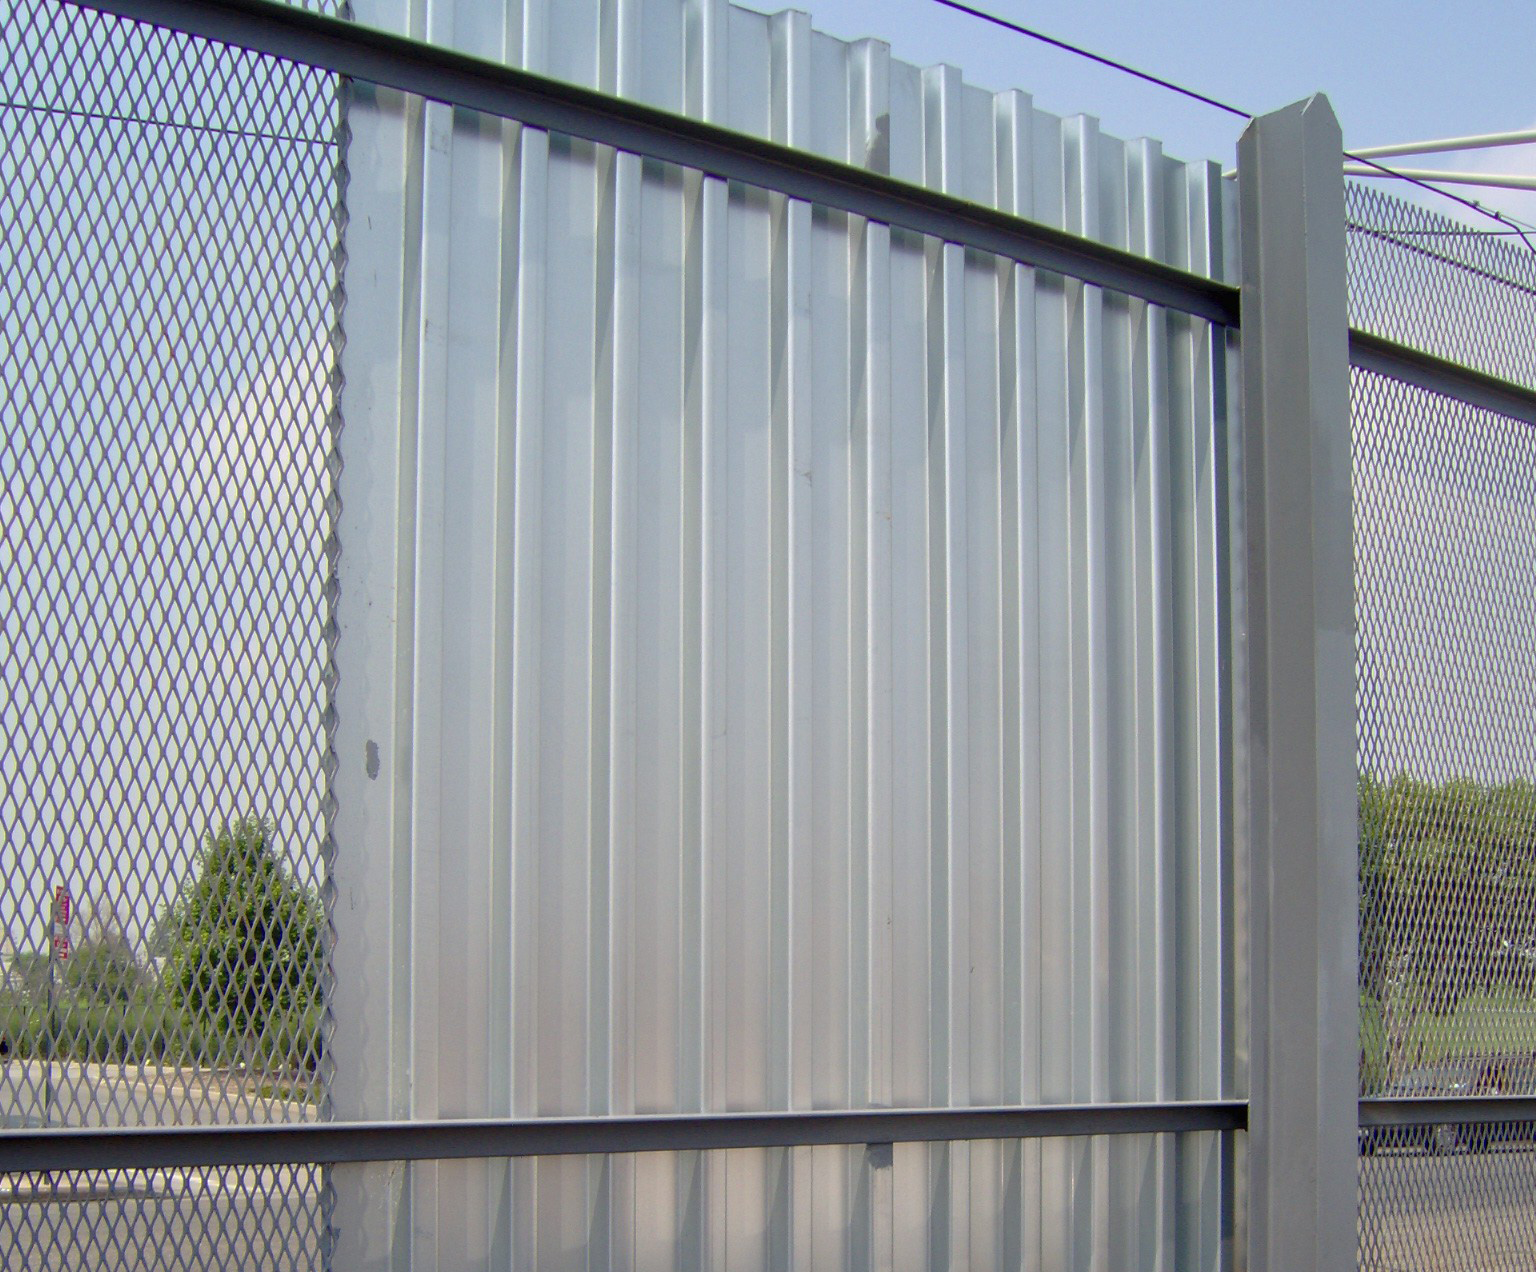 Unique Metal Fence Panels With Privacy Slats 28 Image 23 of 24 ...